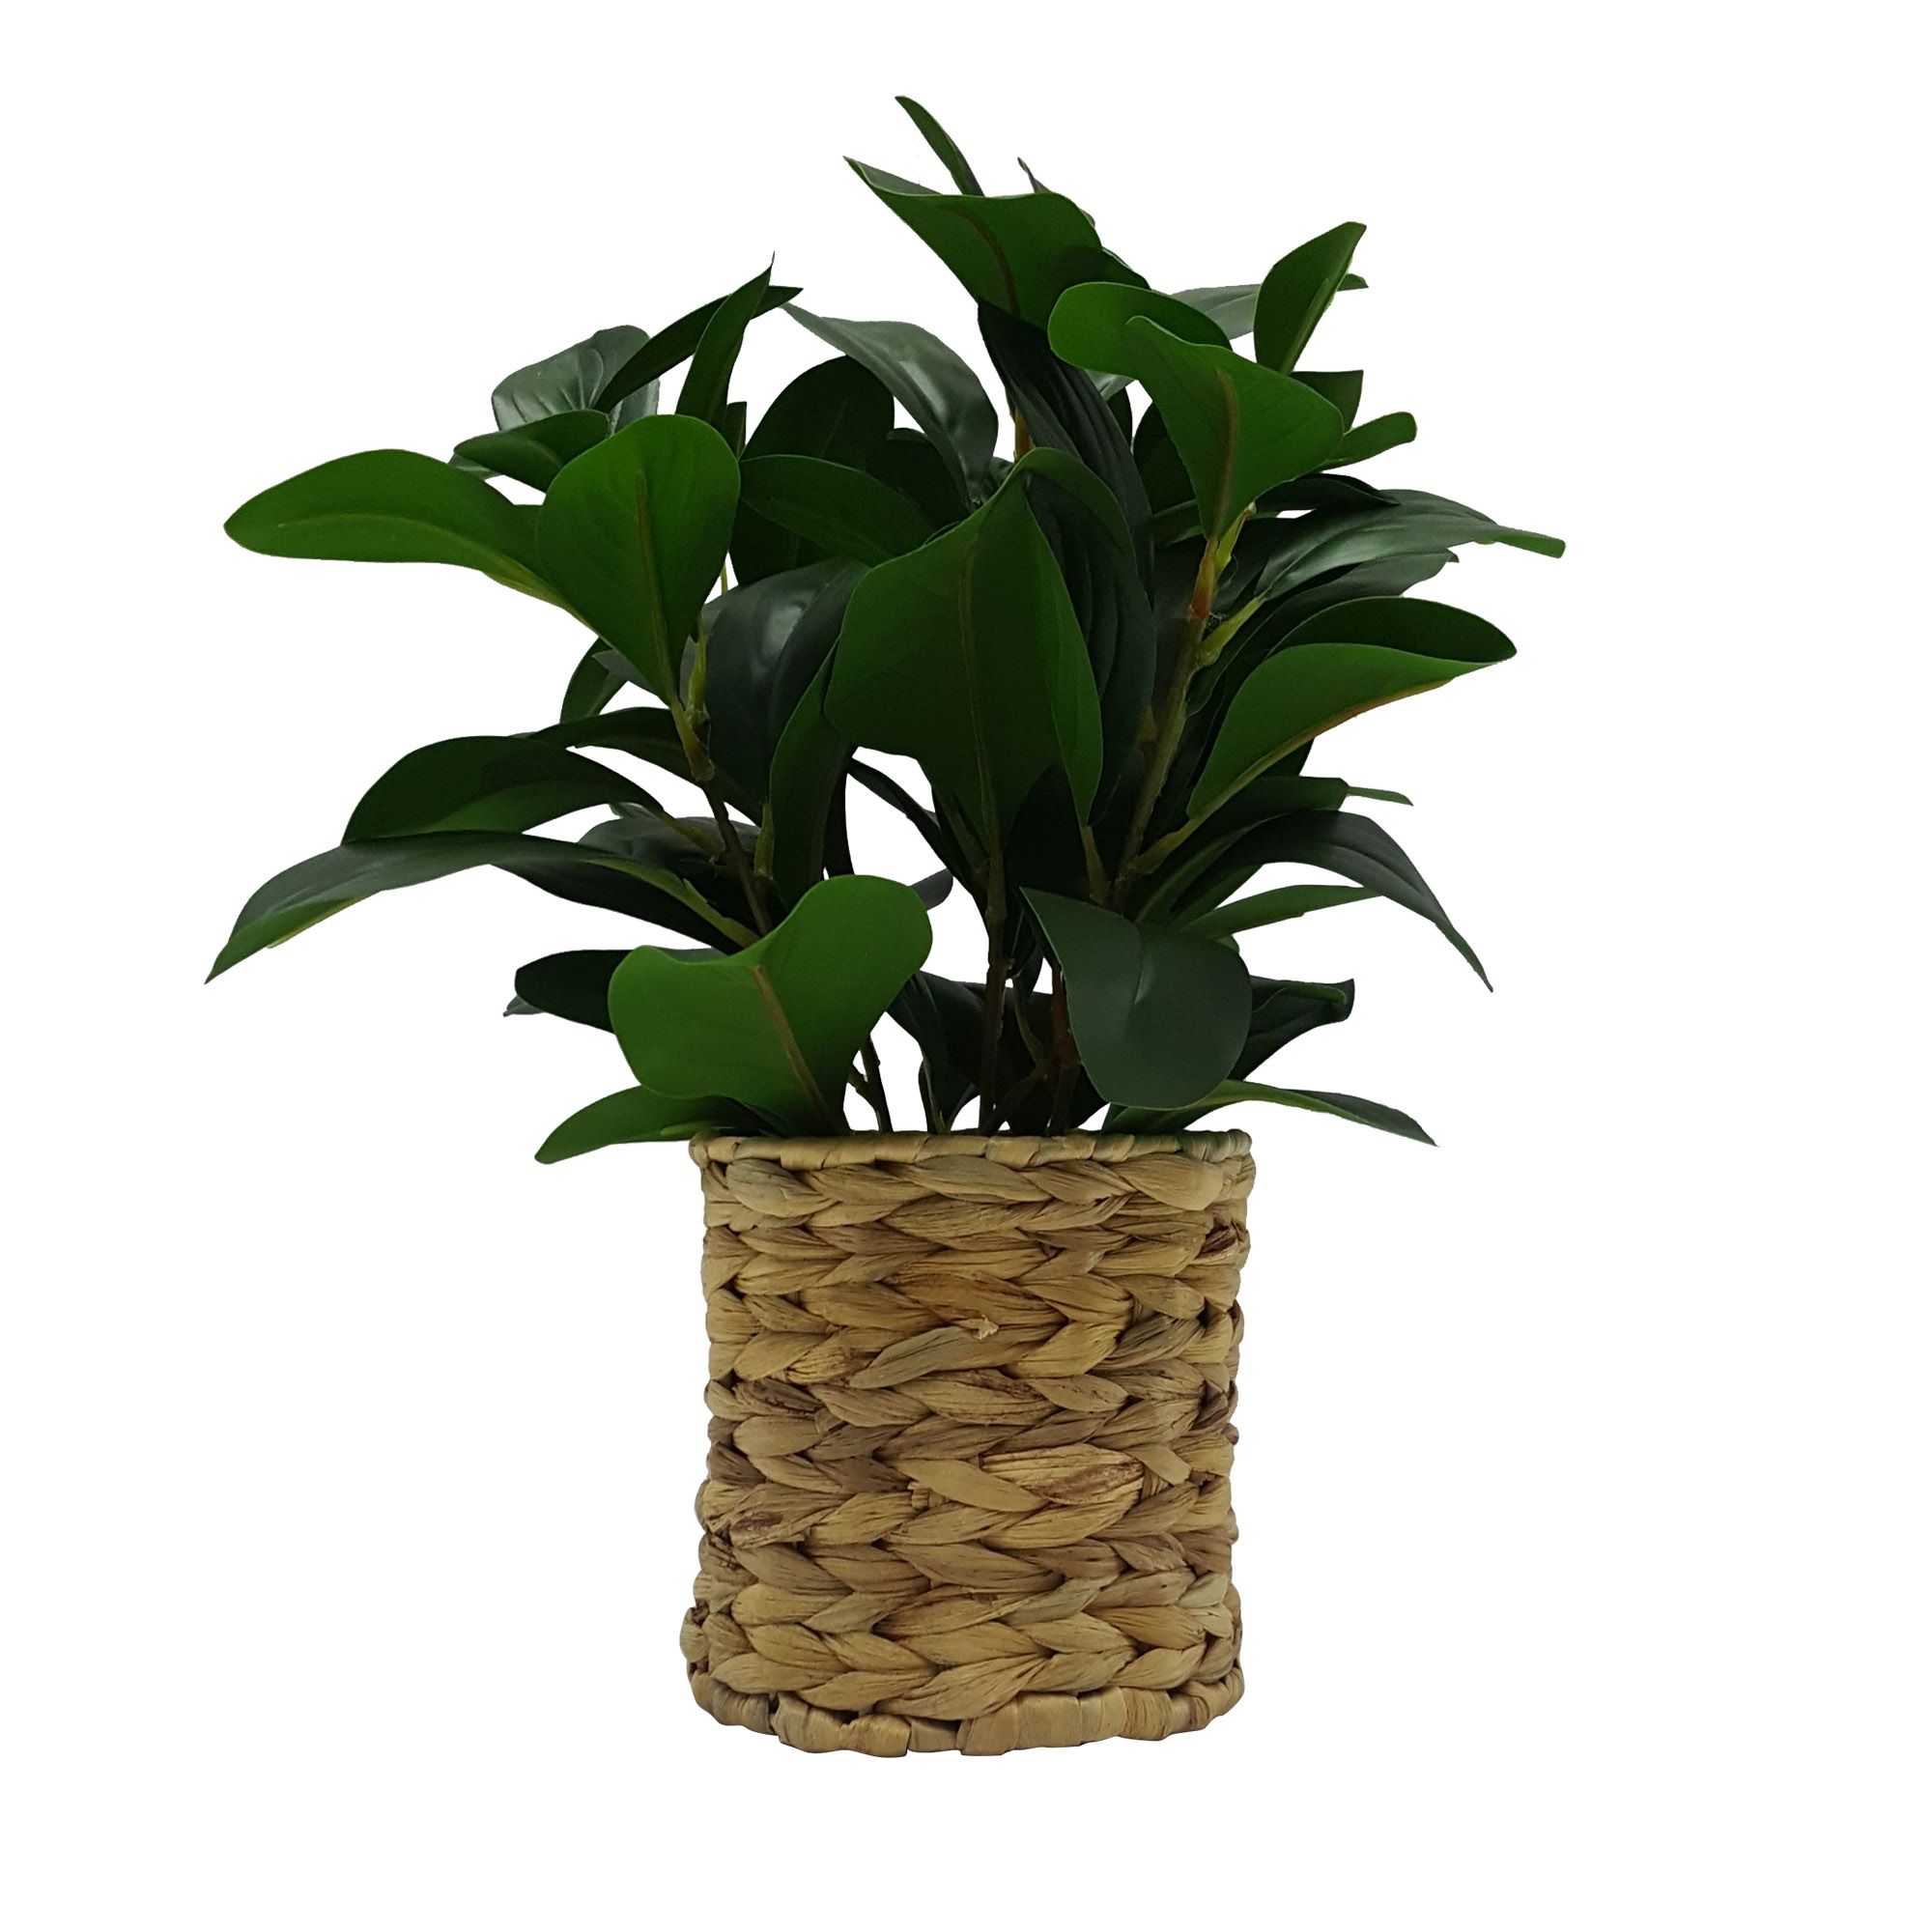 Better Homes & Gardens 13" Artificial Peperomia Plant in Natural Wicker Basket - image 1 of 5